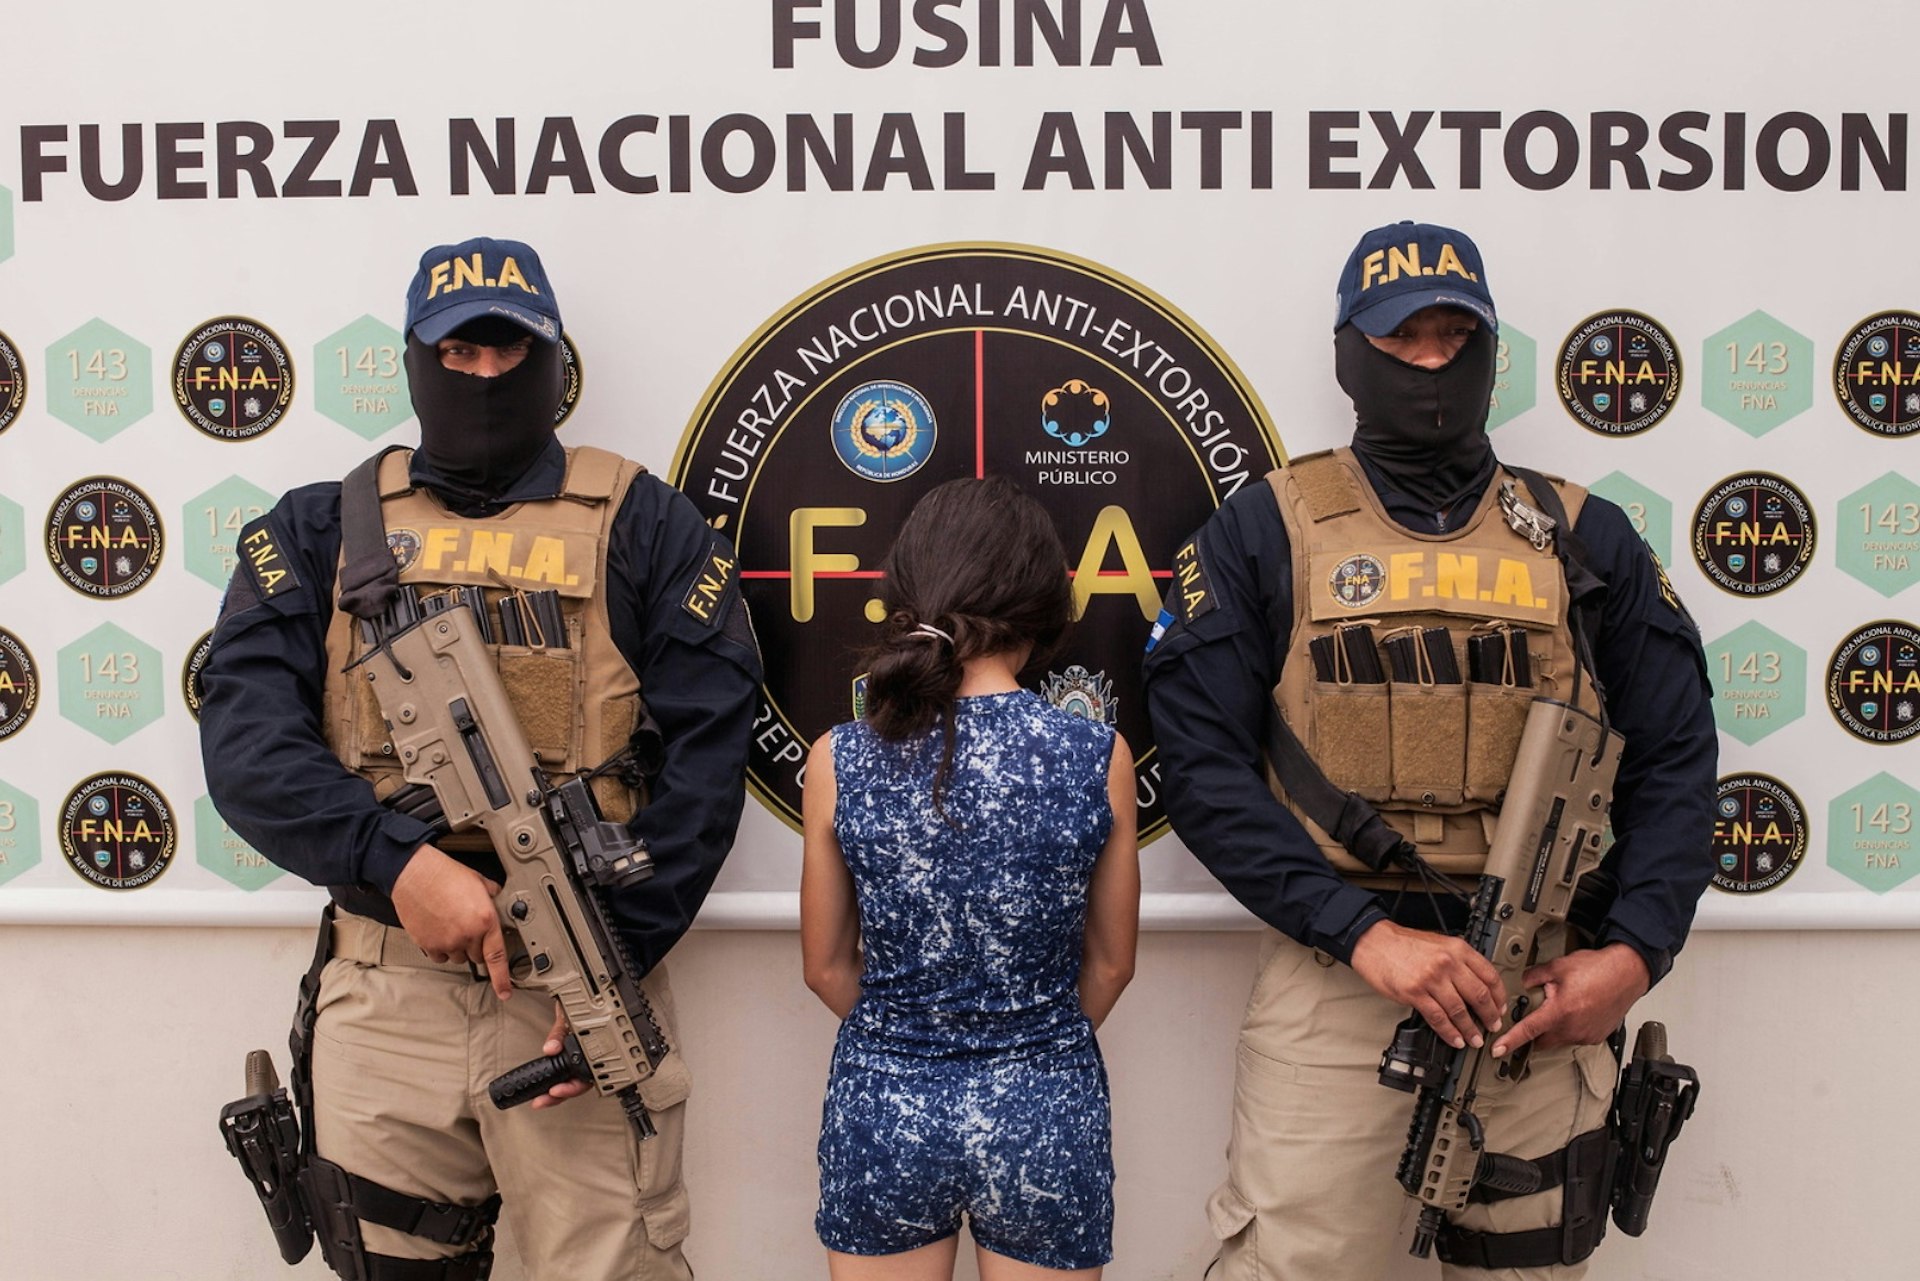 A 16-year-old girl, arrested for extortion, is presented to the press by the police in Tegucigalpa. Teenagers in Honduras are often used to carry out extortion for gangs, their family's lives are threatened if they do not cooperate. If they are caught, like this girl, they will go to prison for taking part in the crime. 9th August 2017.